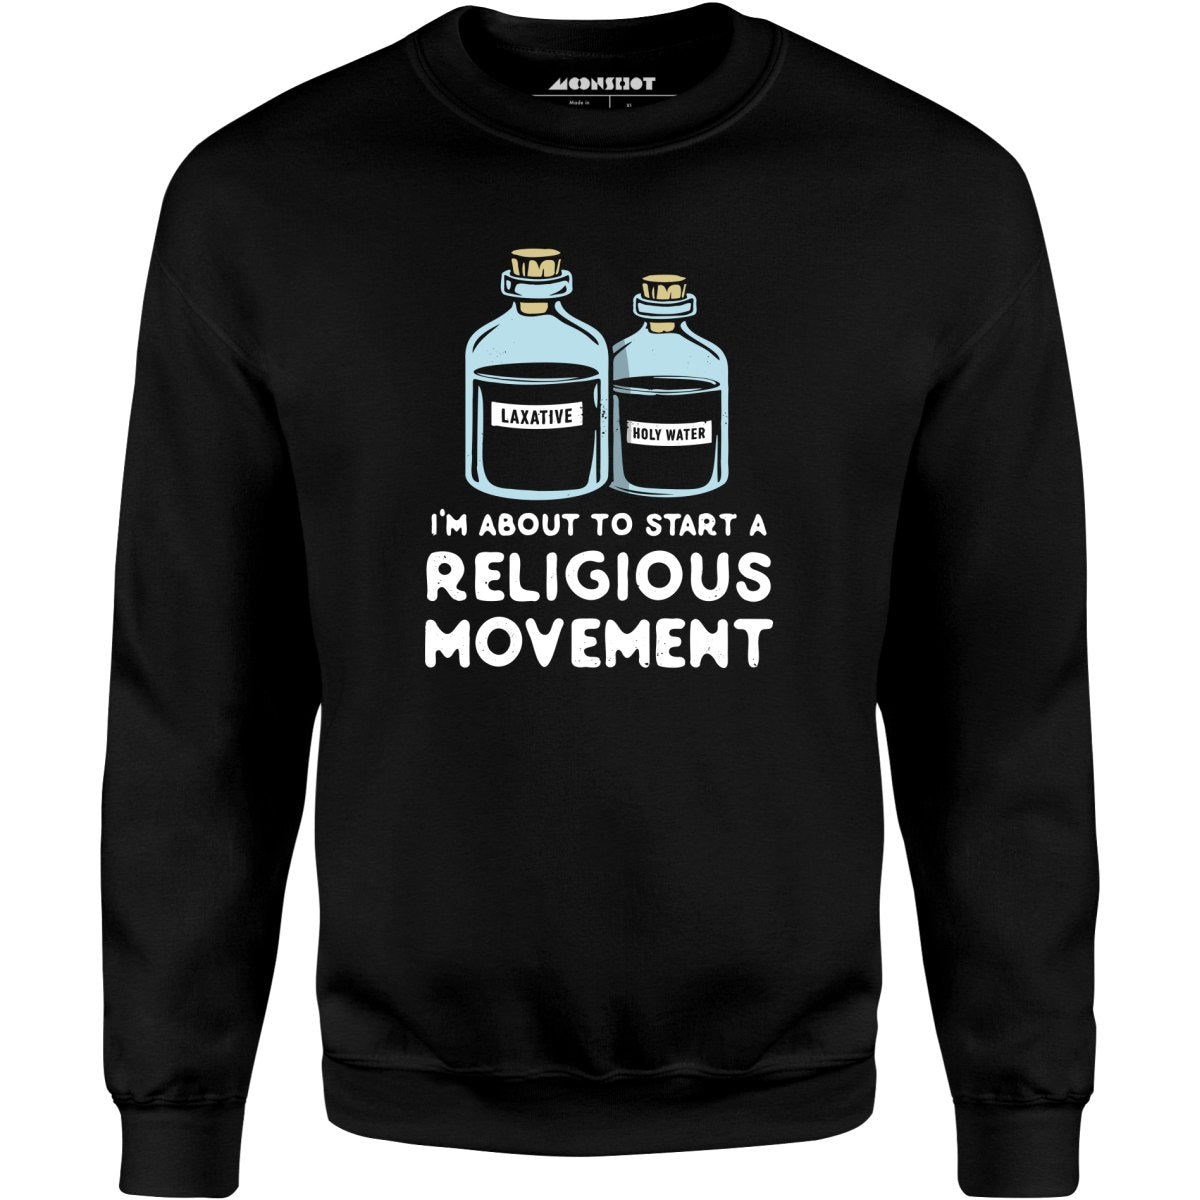 I'm About to Start a Religious Movement - Unisex Sweatshirt